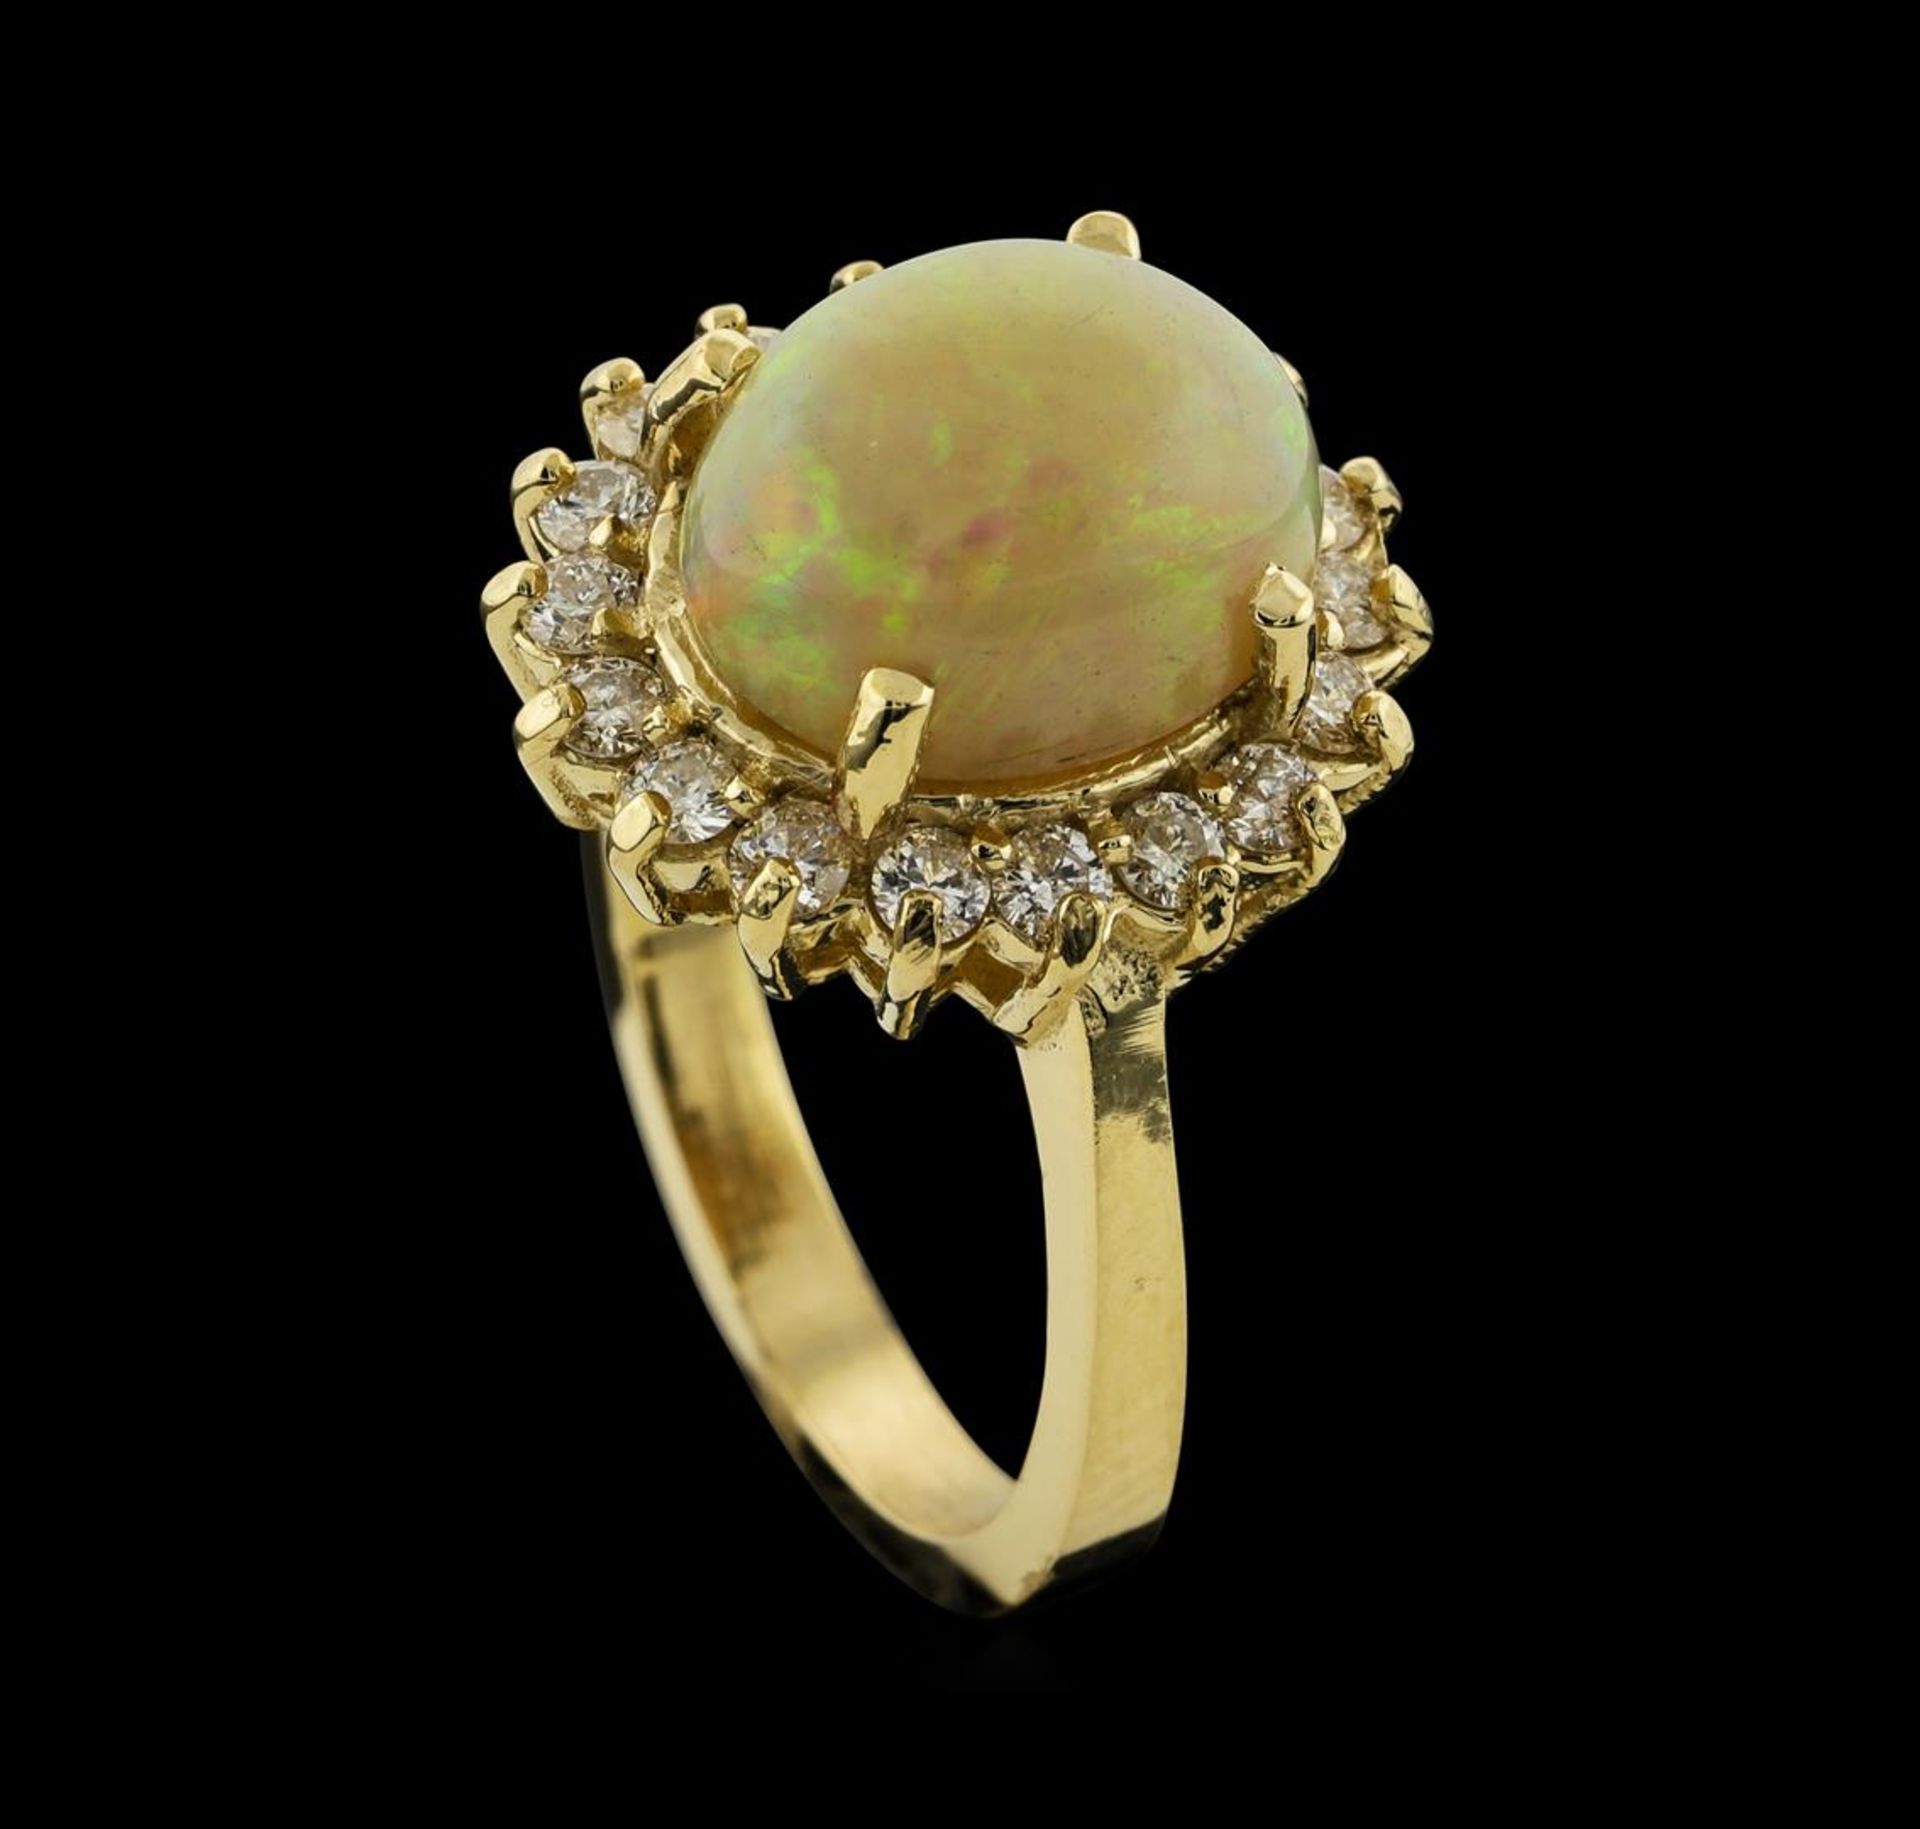 2.82 ctw Opal and Diamond Ring - 14KT Yellow Gold - Image 4 of 4